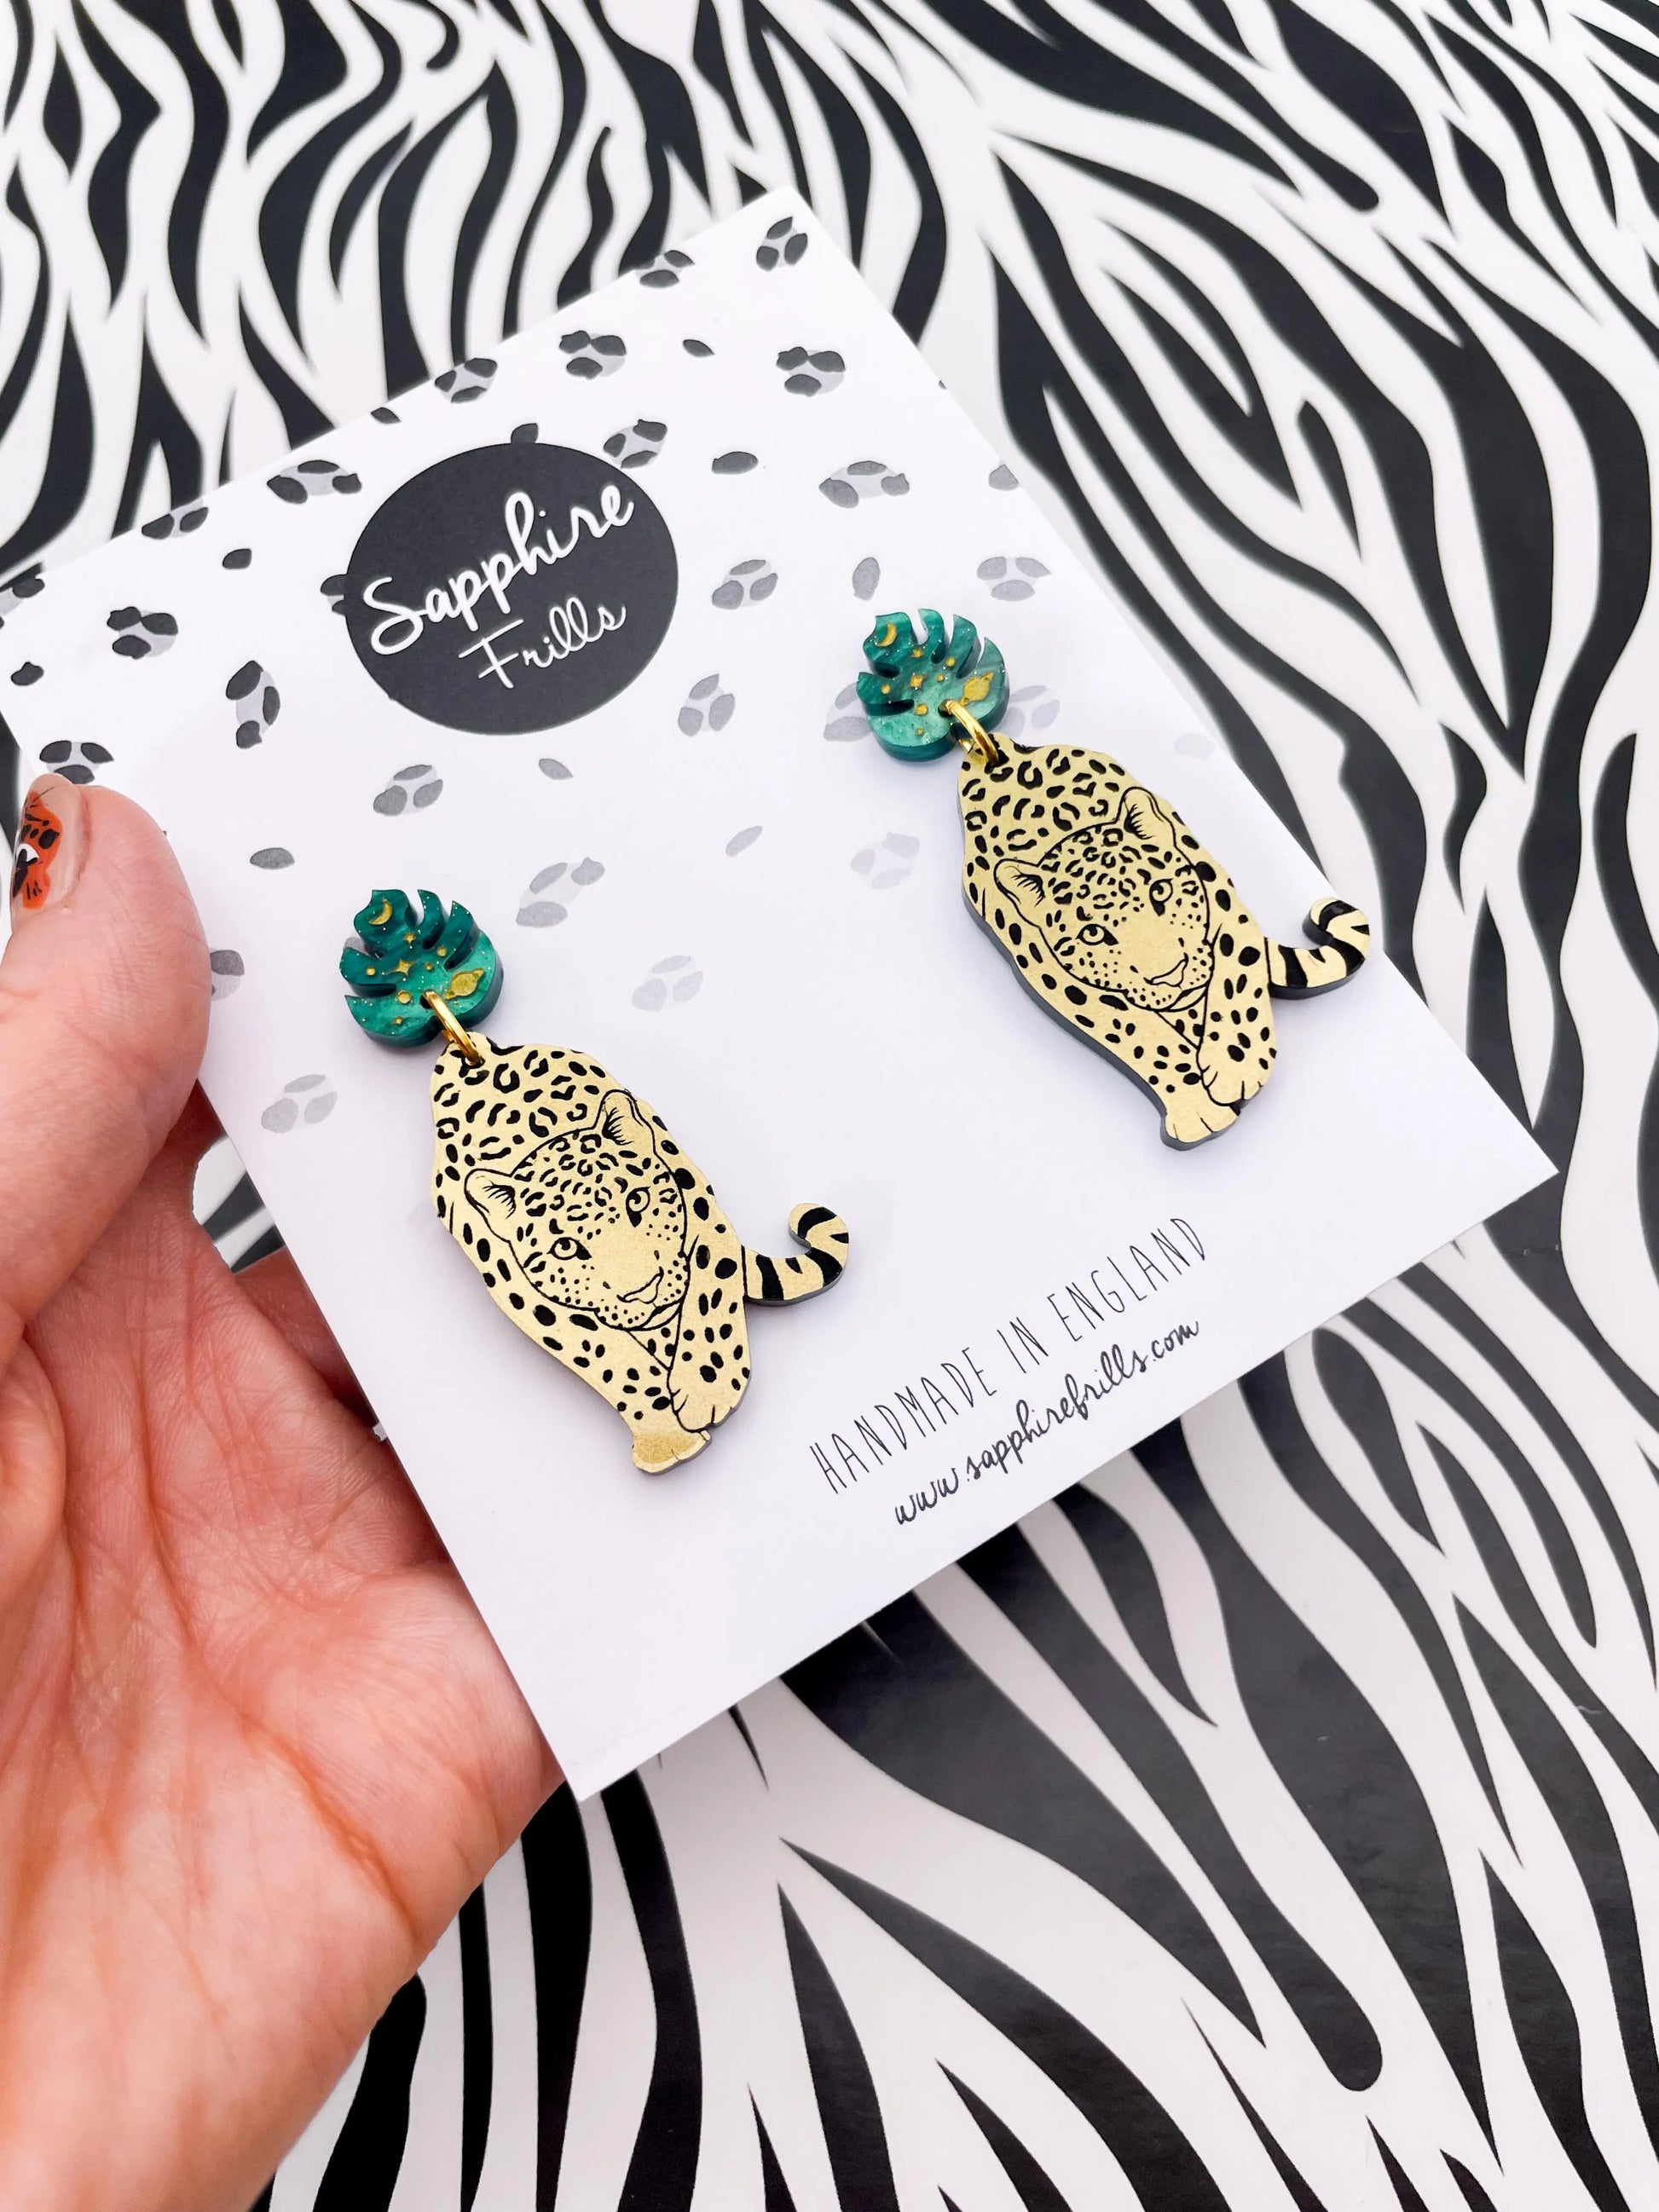 Green Galaxy Glitter Marble and Gold Acrylic Leopard Monstera Leaf Dangle Earrings from Sapphire Frills